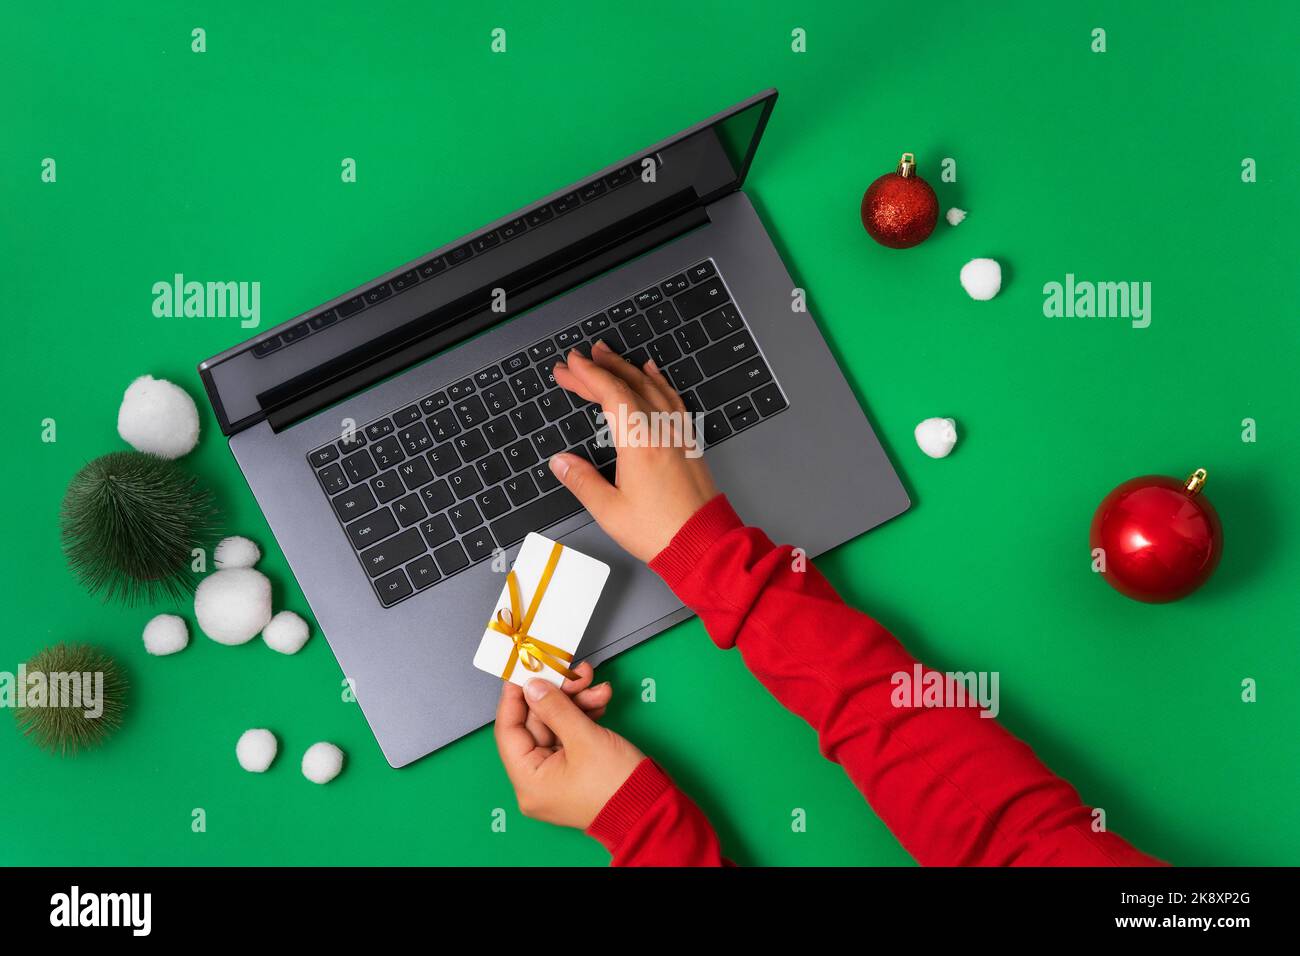 Women's hands with bank, credit card pays for online shopping on laptop. Top view of green background with Christmas decor, flat lay. The concept of C Stock Photo